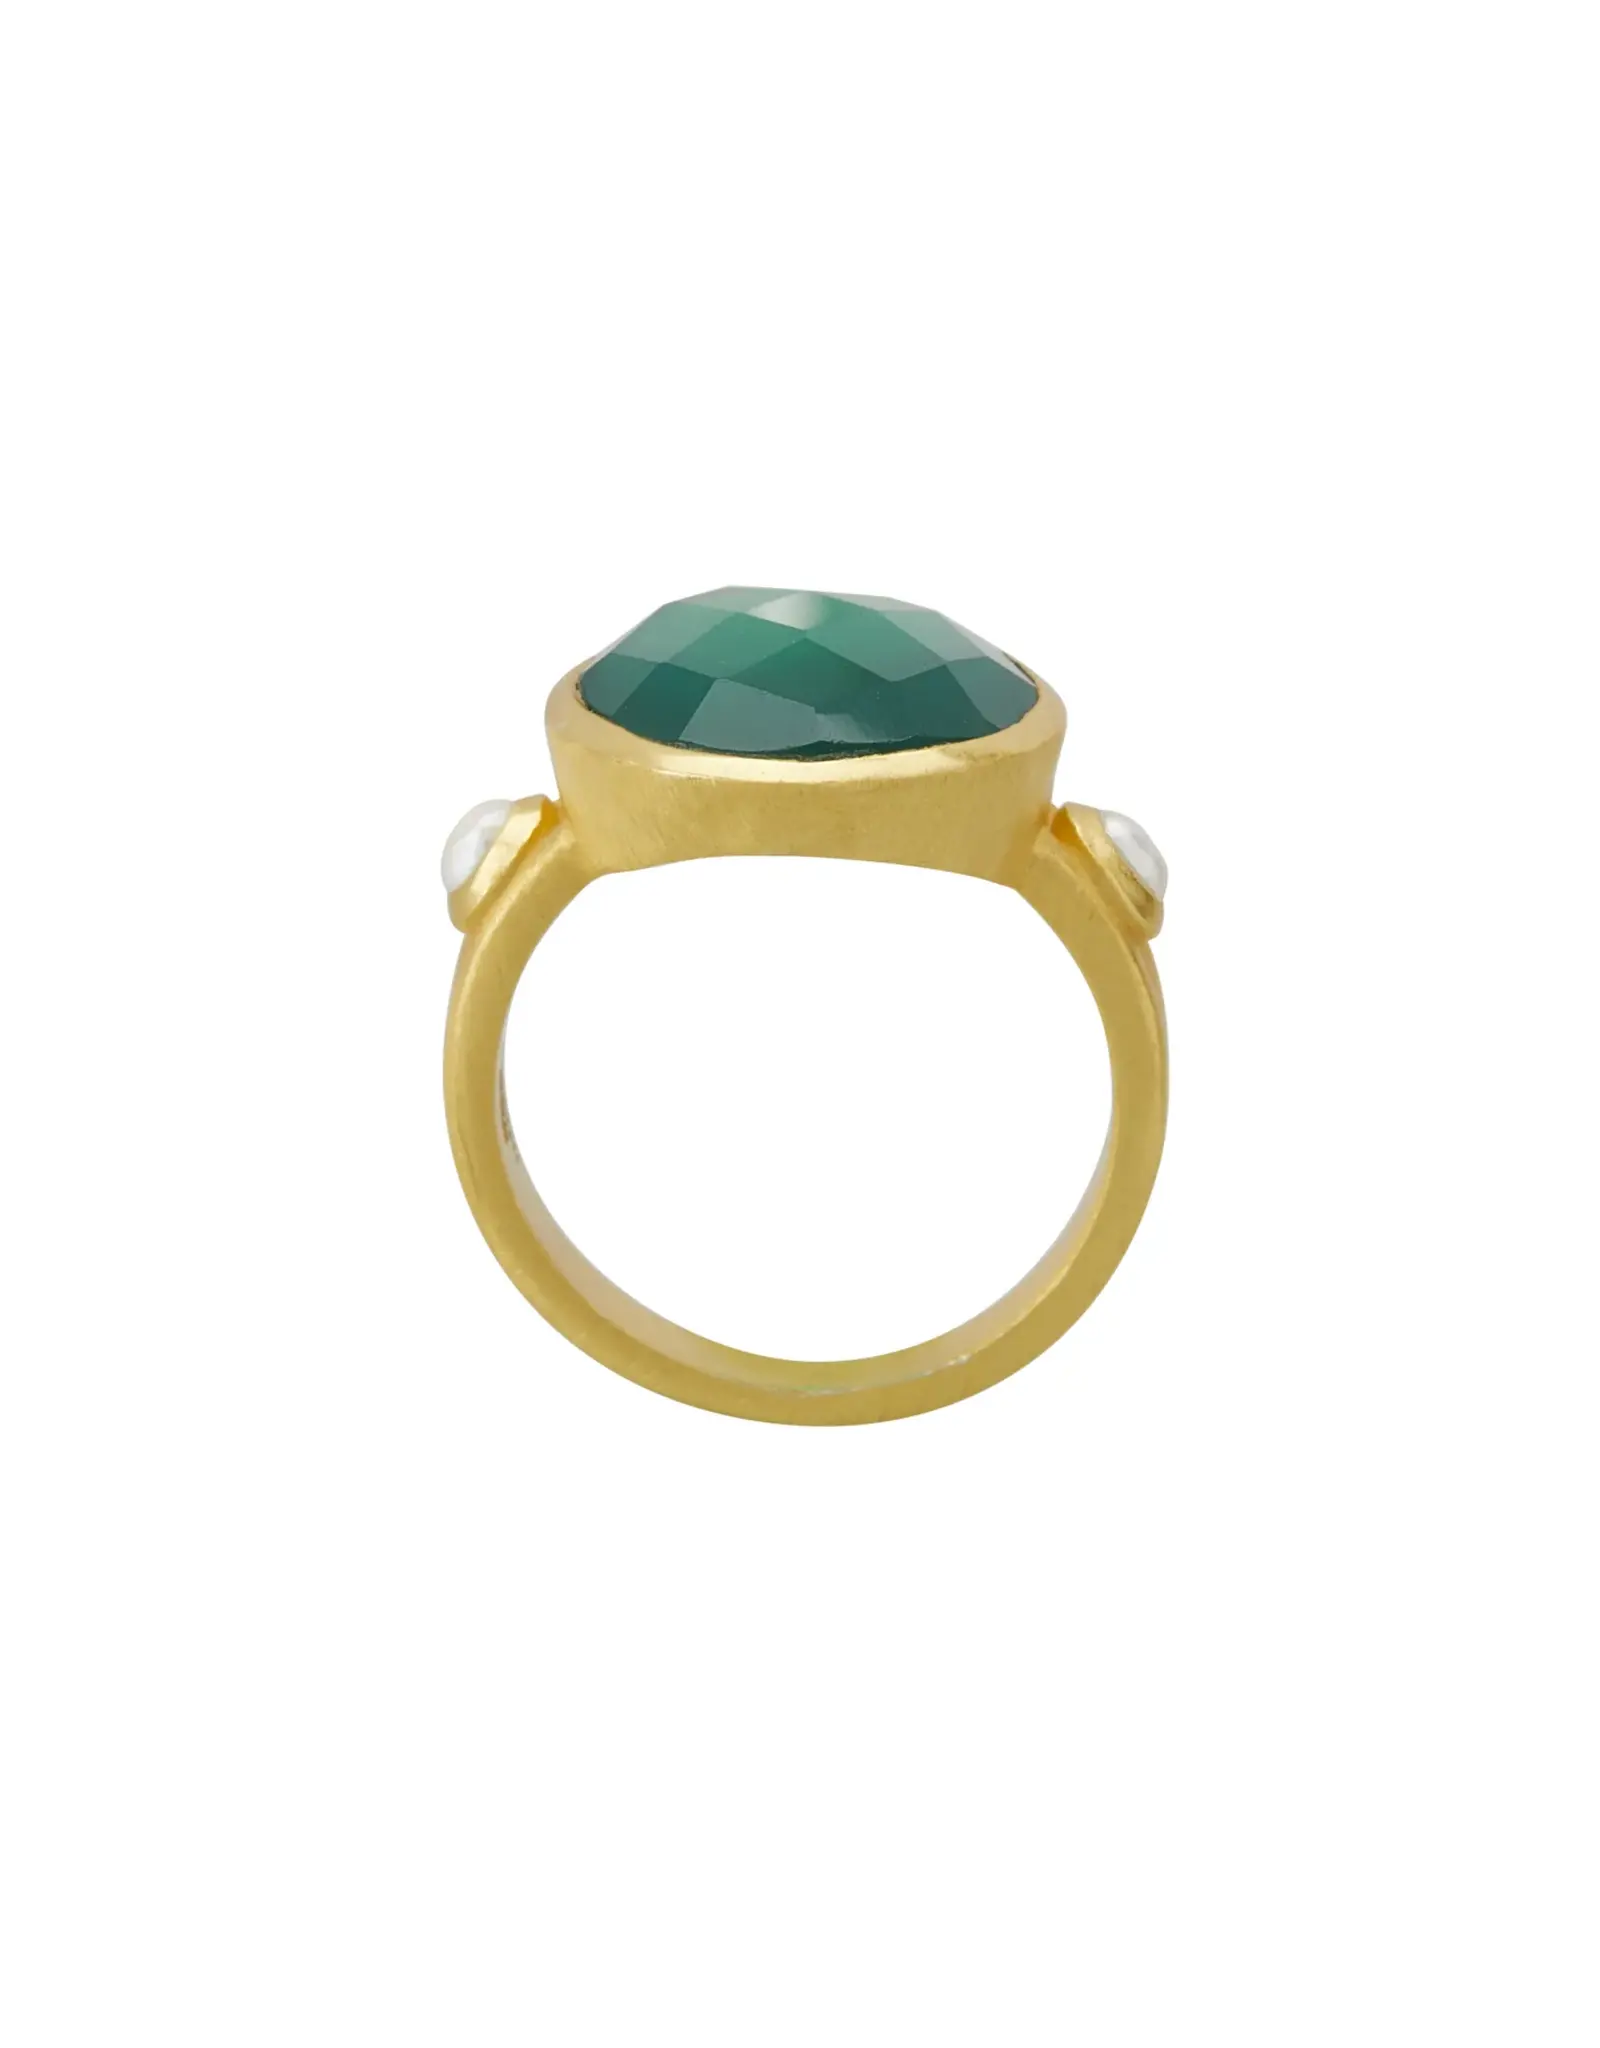 MURKANI GREEN ONYX AND PEARL RING SIZE 7